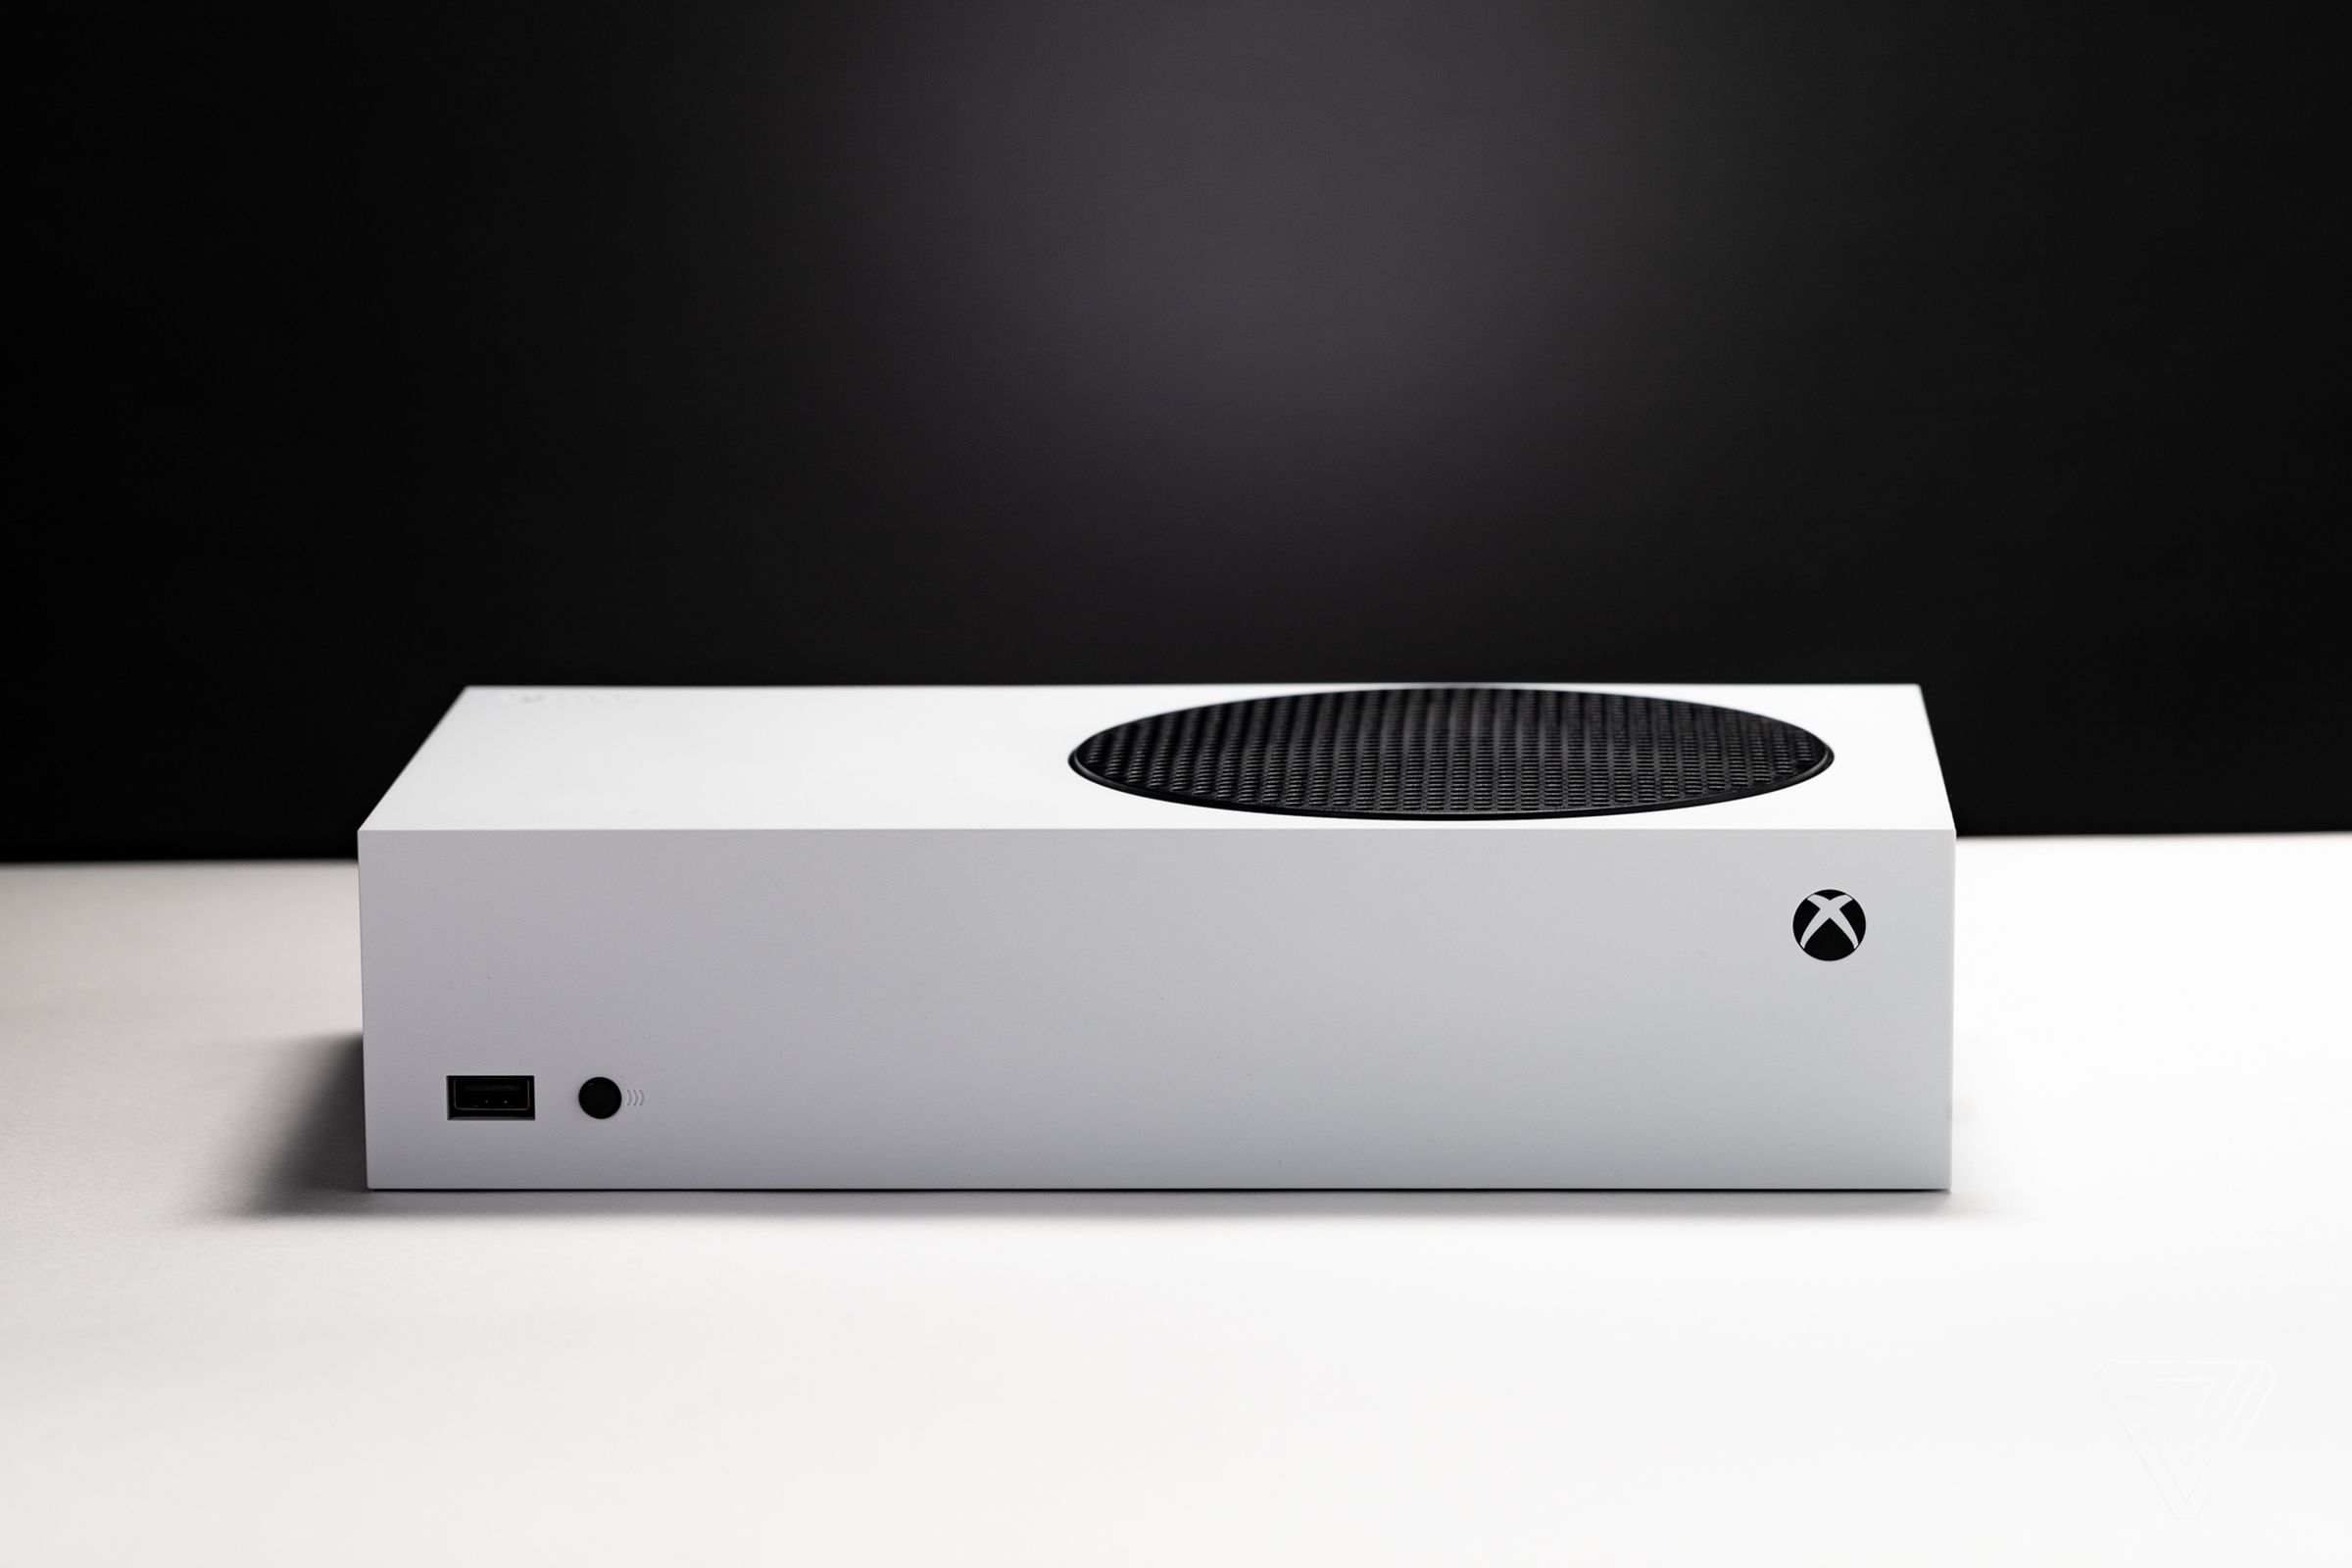 The white Xbox Series S in a horizontal position.